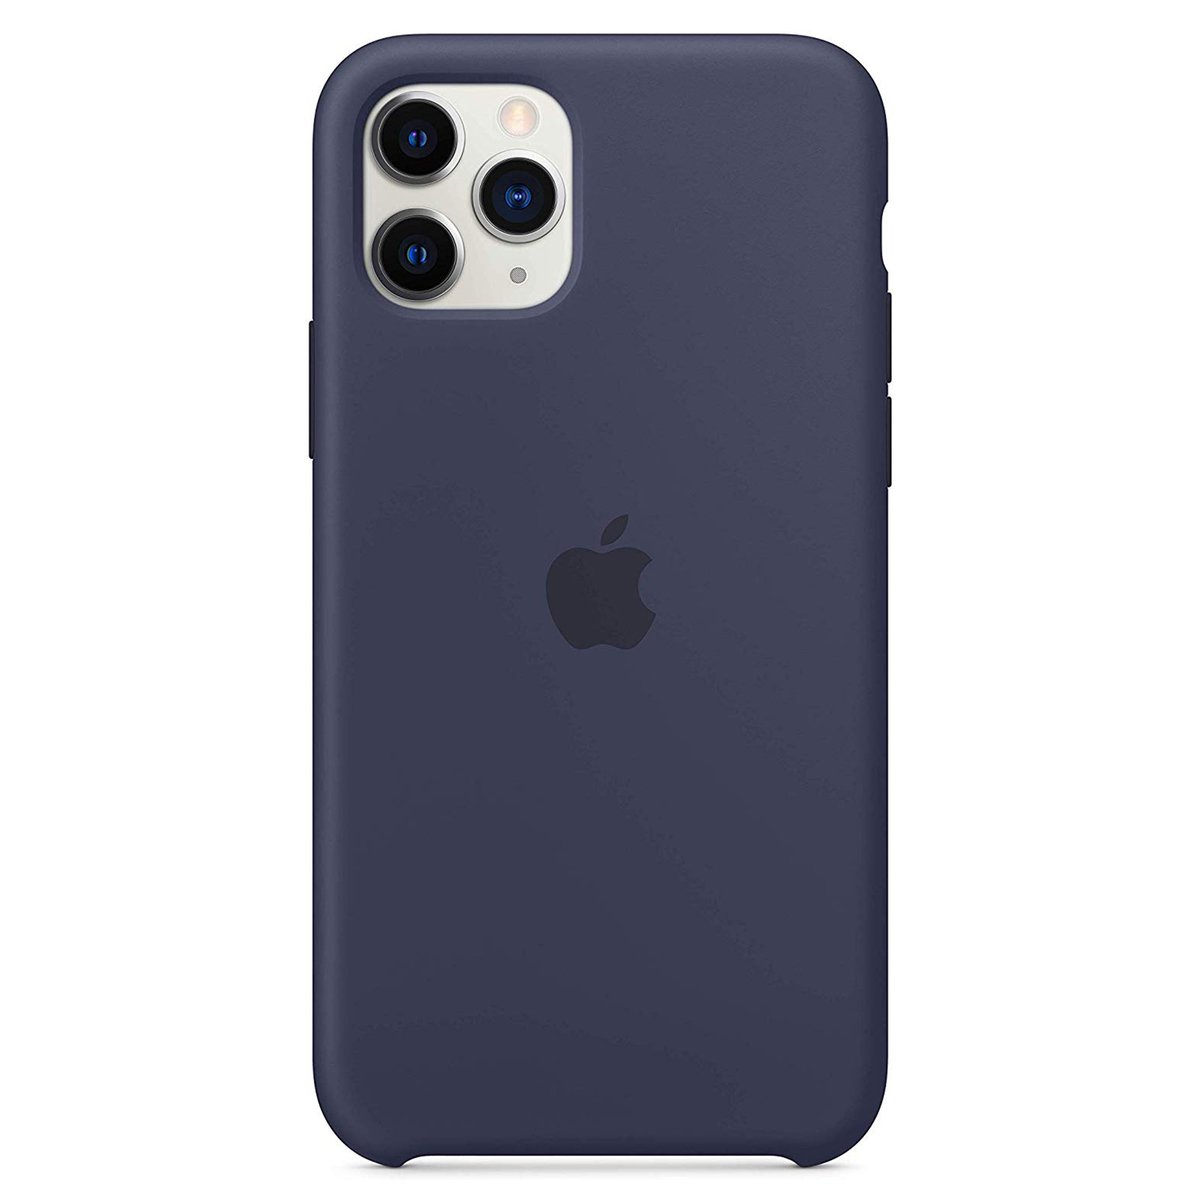 iPhone 11 Pro Silicone Case MWYJ2ZM Midnight Blue